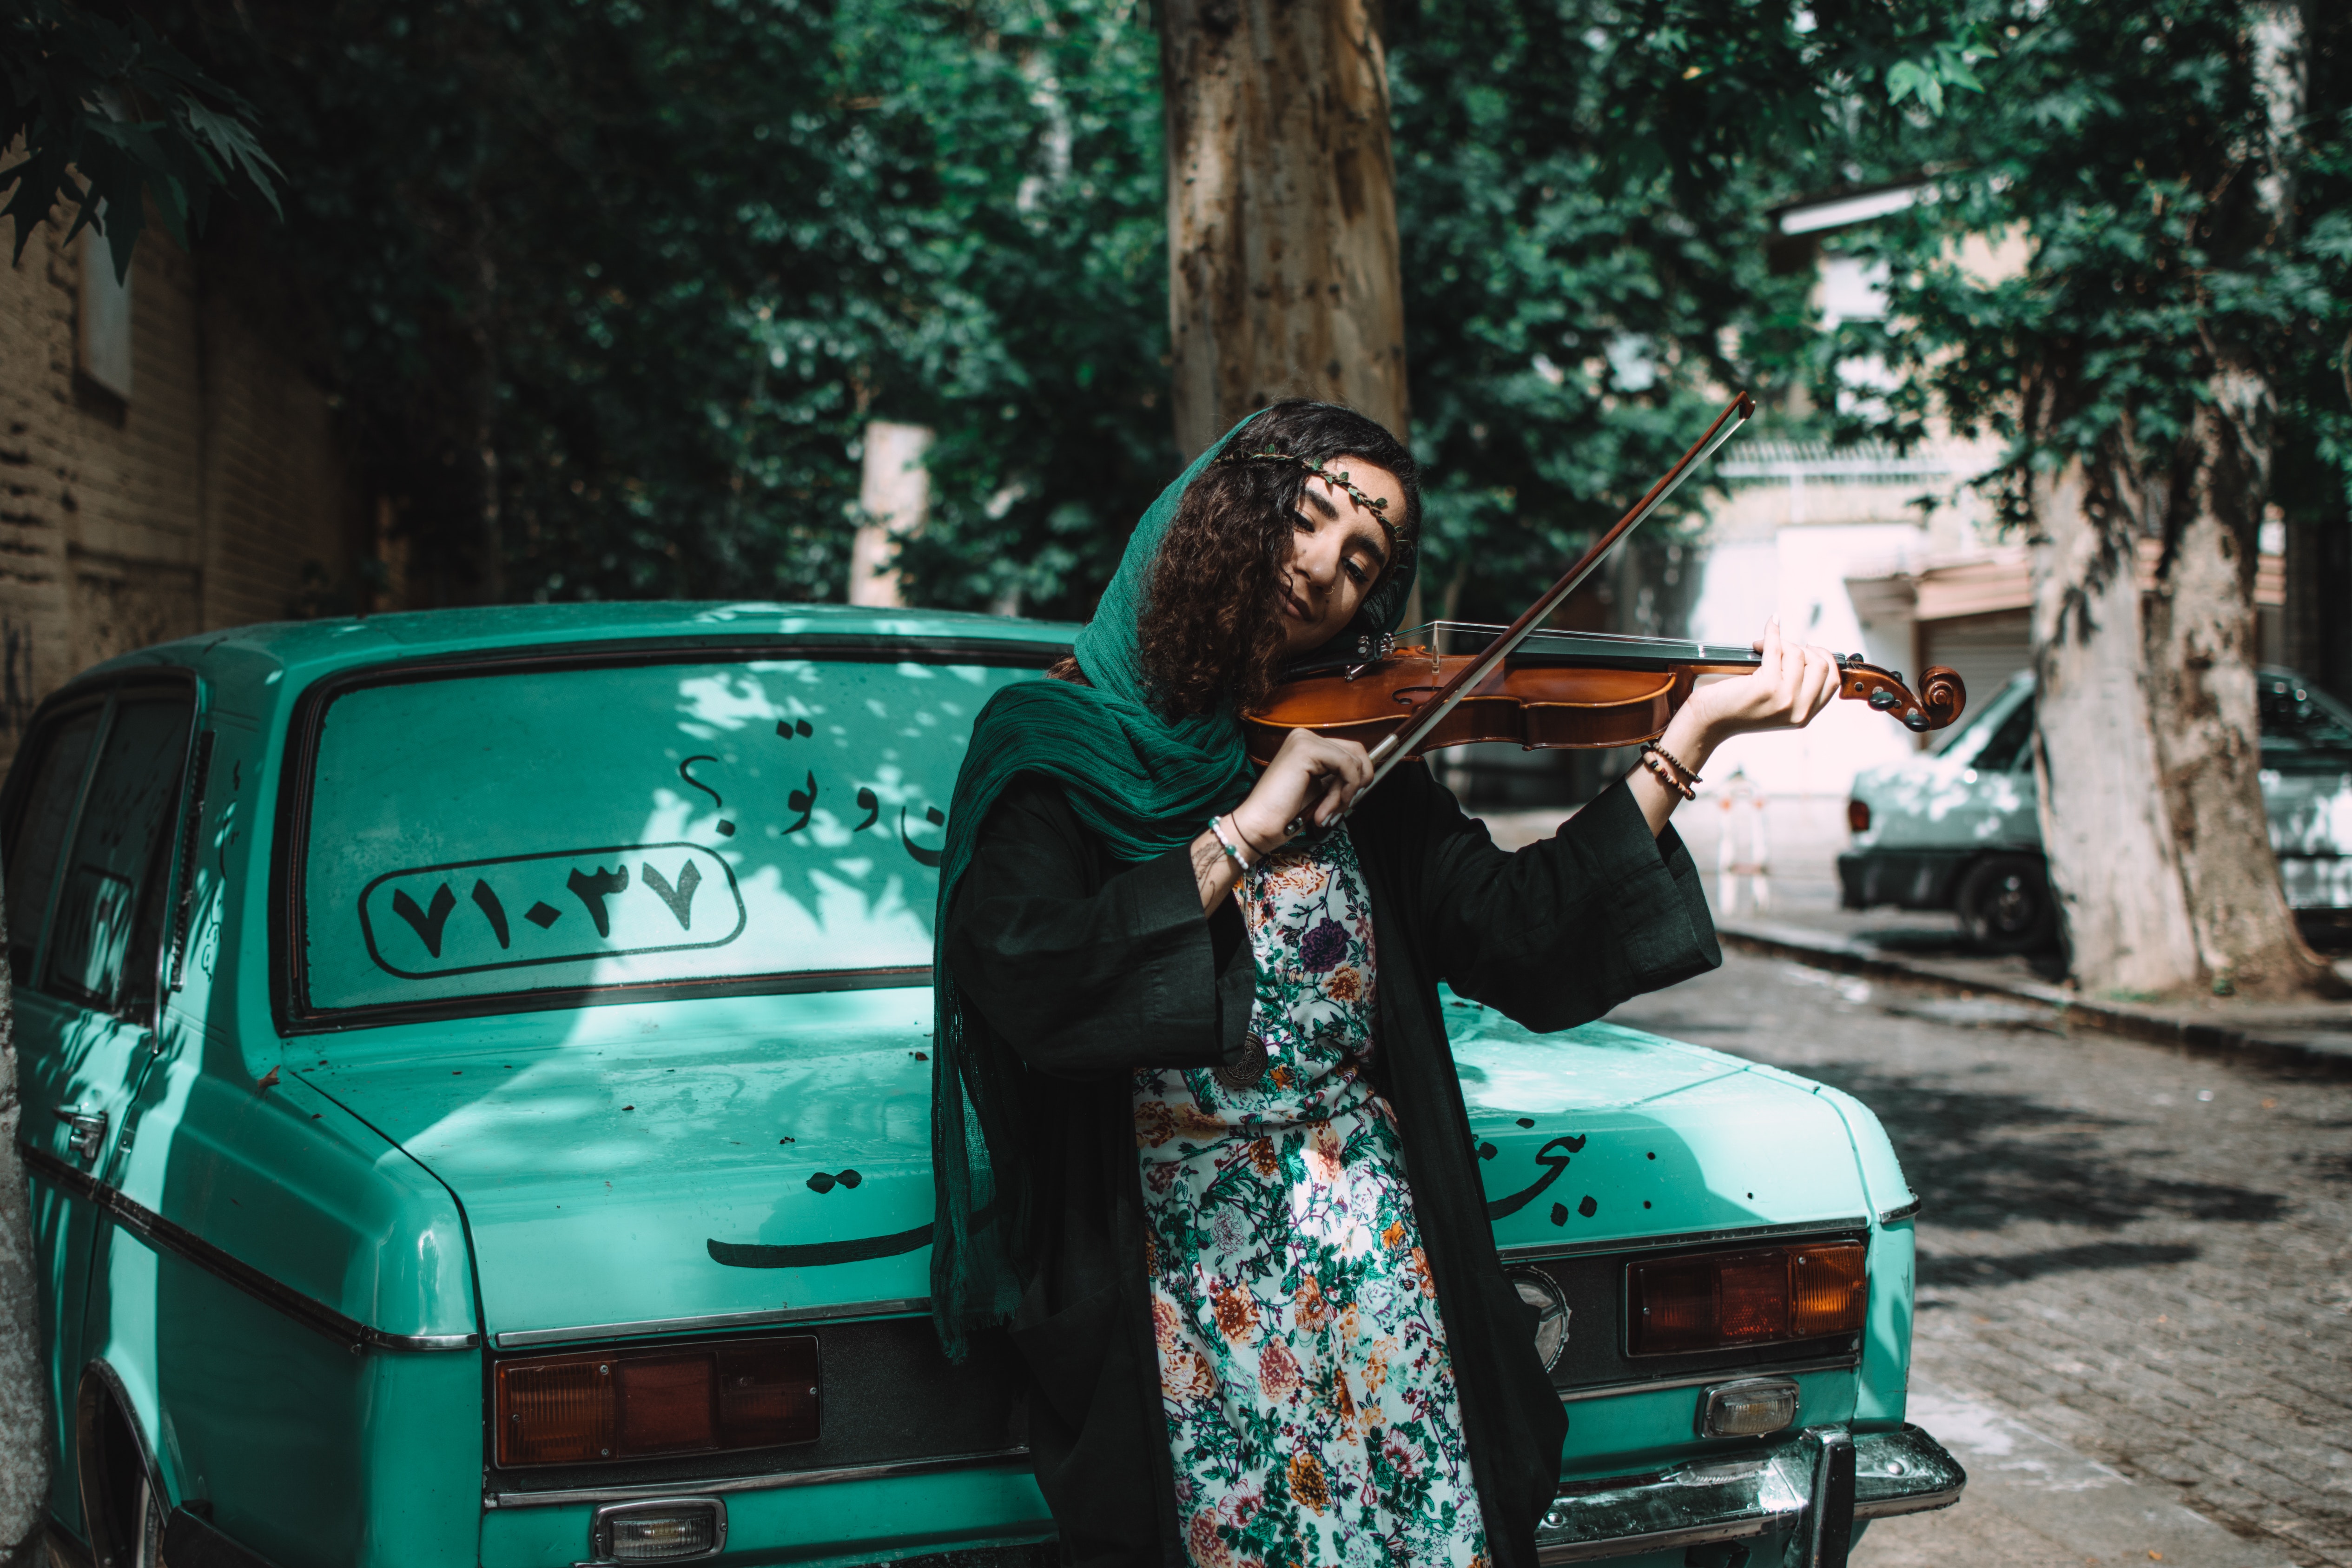 A woman playing the violin while leaning on a green car